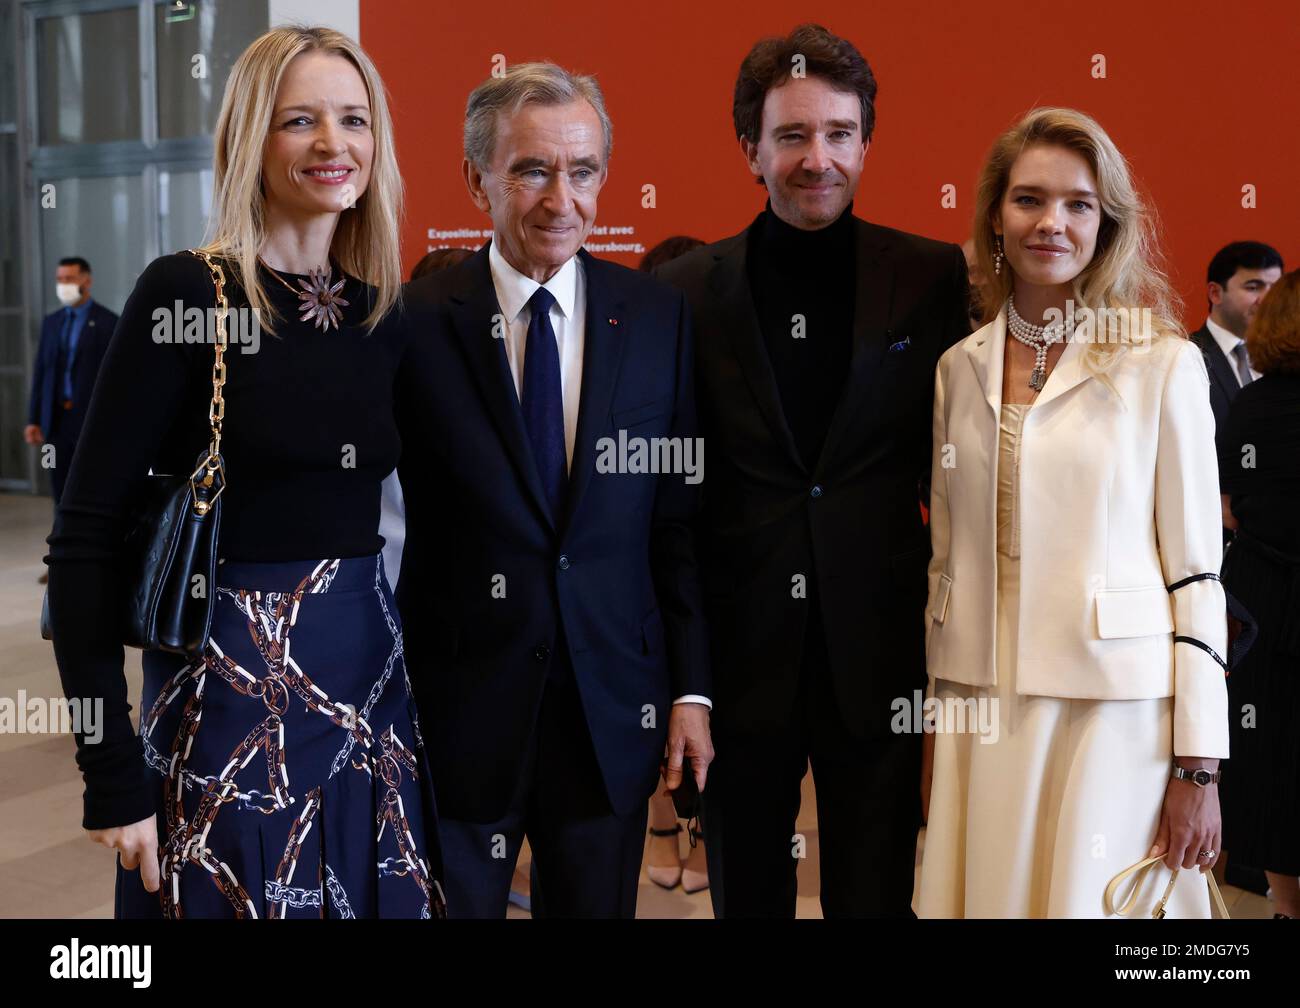 LVMH luxury group CEO Bernard Arnault, center, flanked by his daughter  Delphine Arnault, left, and his son Antoine Arnault as they attend the  opening of the exhibition 'The Morozov Collection, Icons of